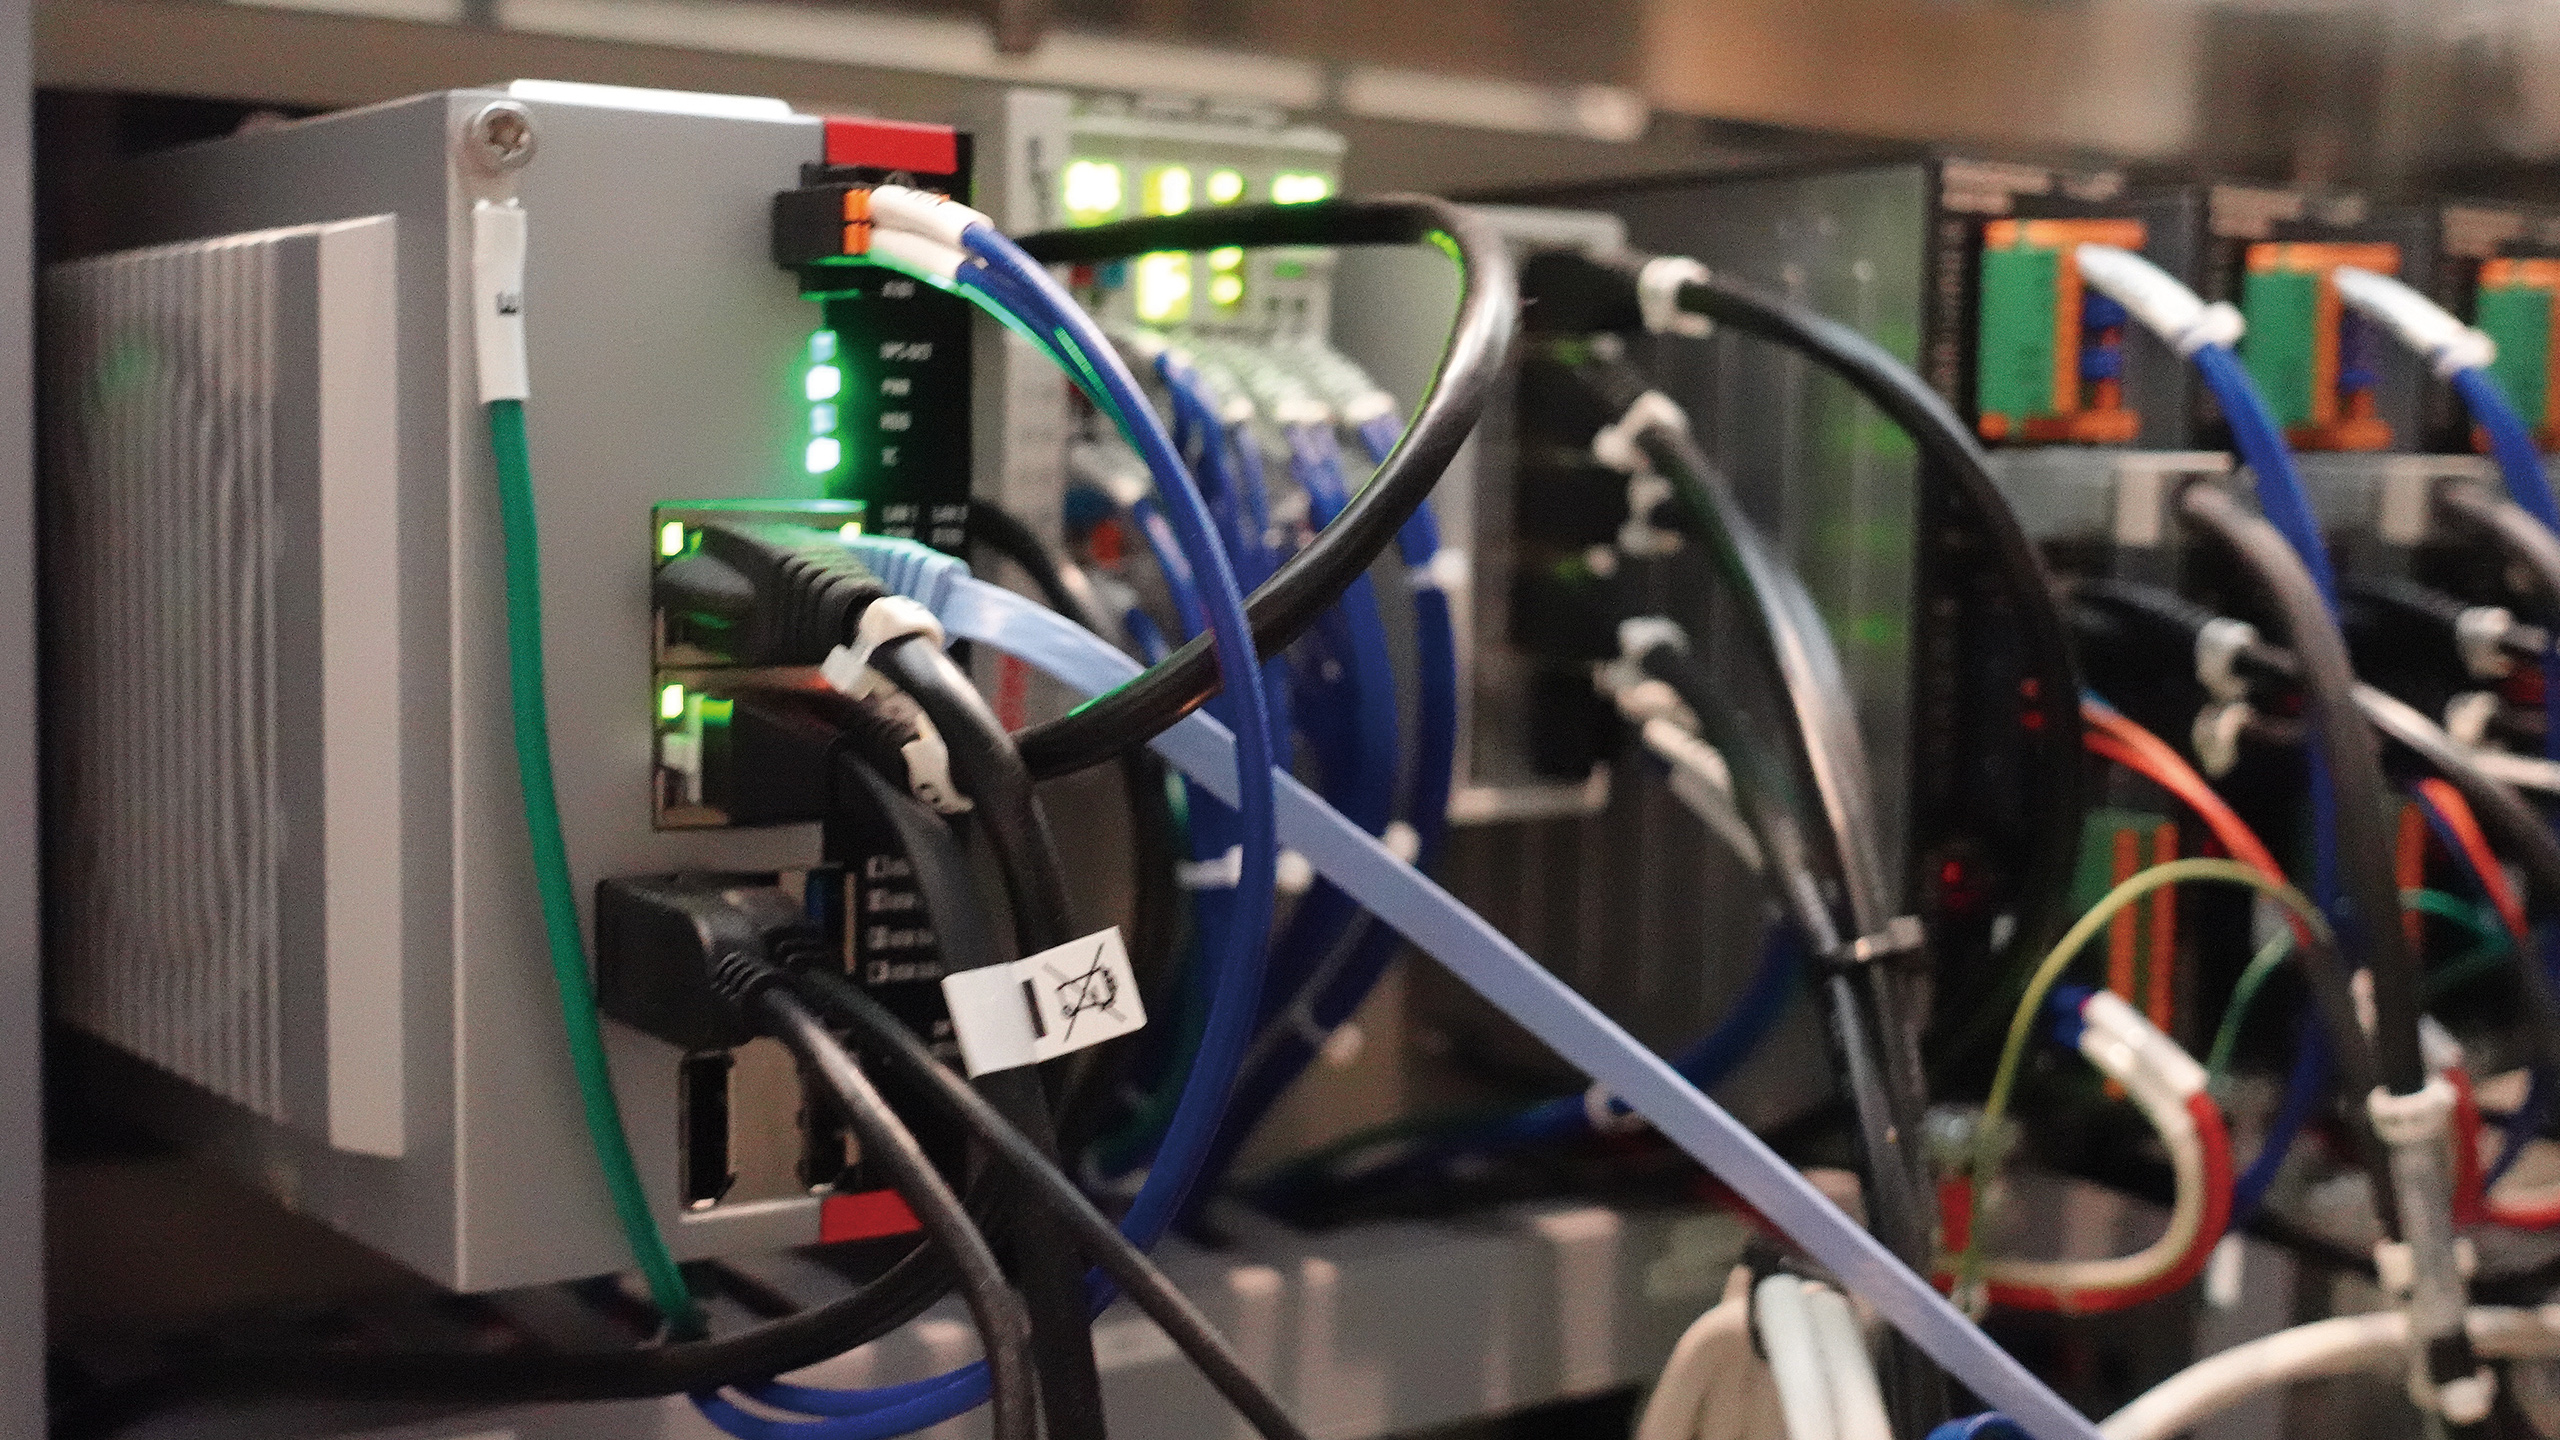 A Beckhoff IPC C6030 not only controls the conveyor systems and oven doors via TwinCAT; the trained AI model also runs on the same device under Windows. 